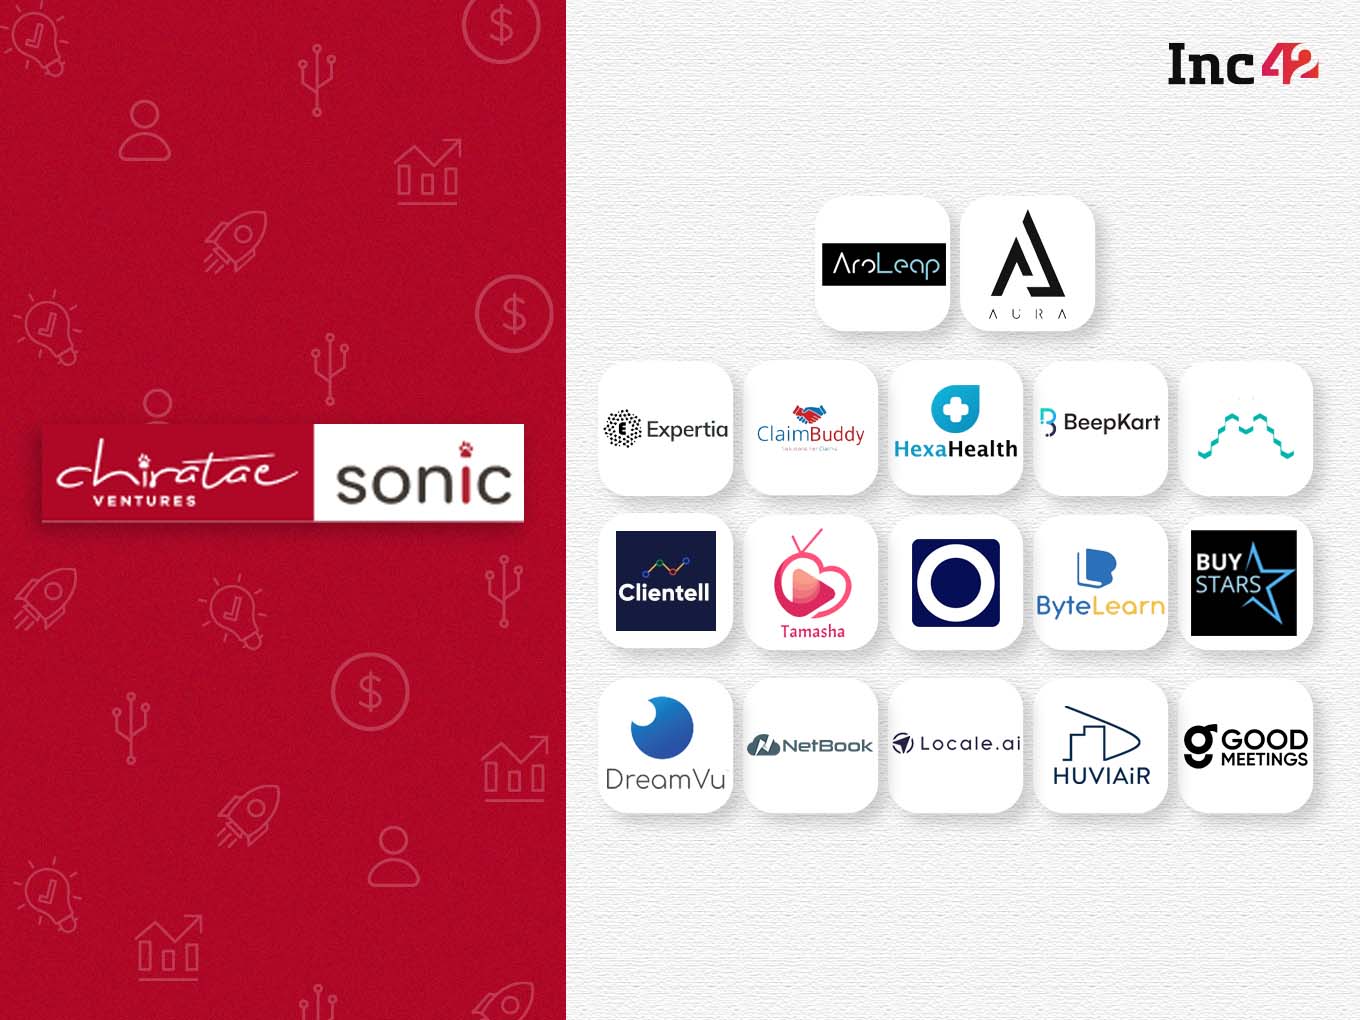 19 Startups Make The Cut In Chiratae’s Maiden Accelerator Programme ‘Sonic’